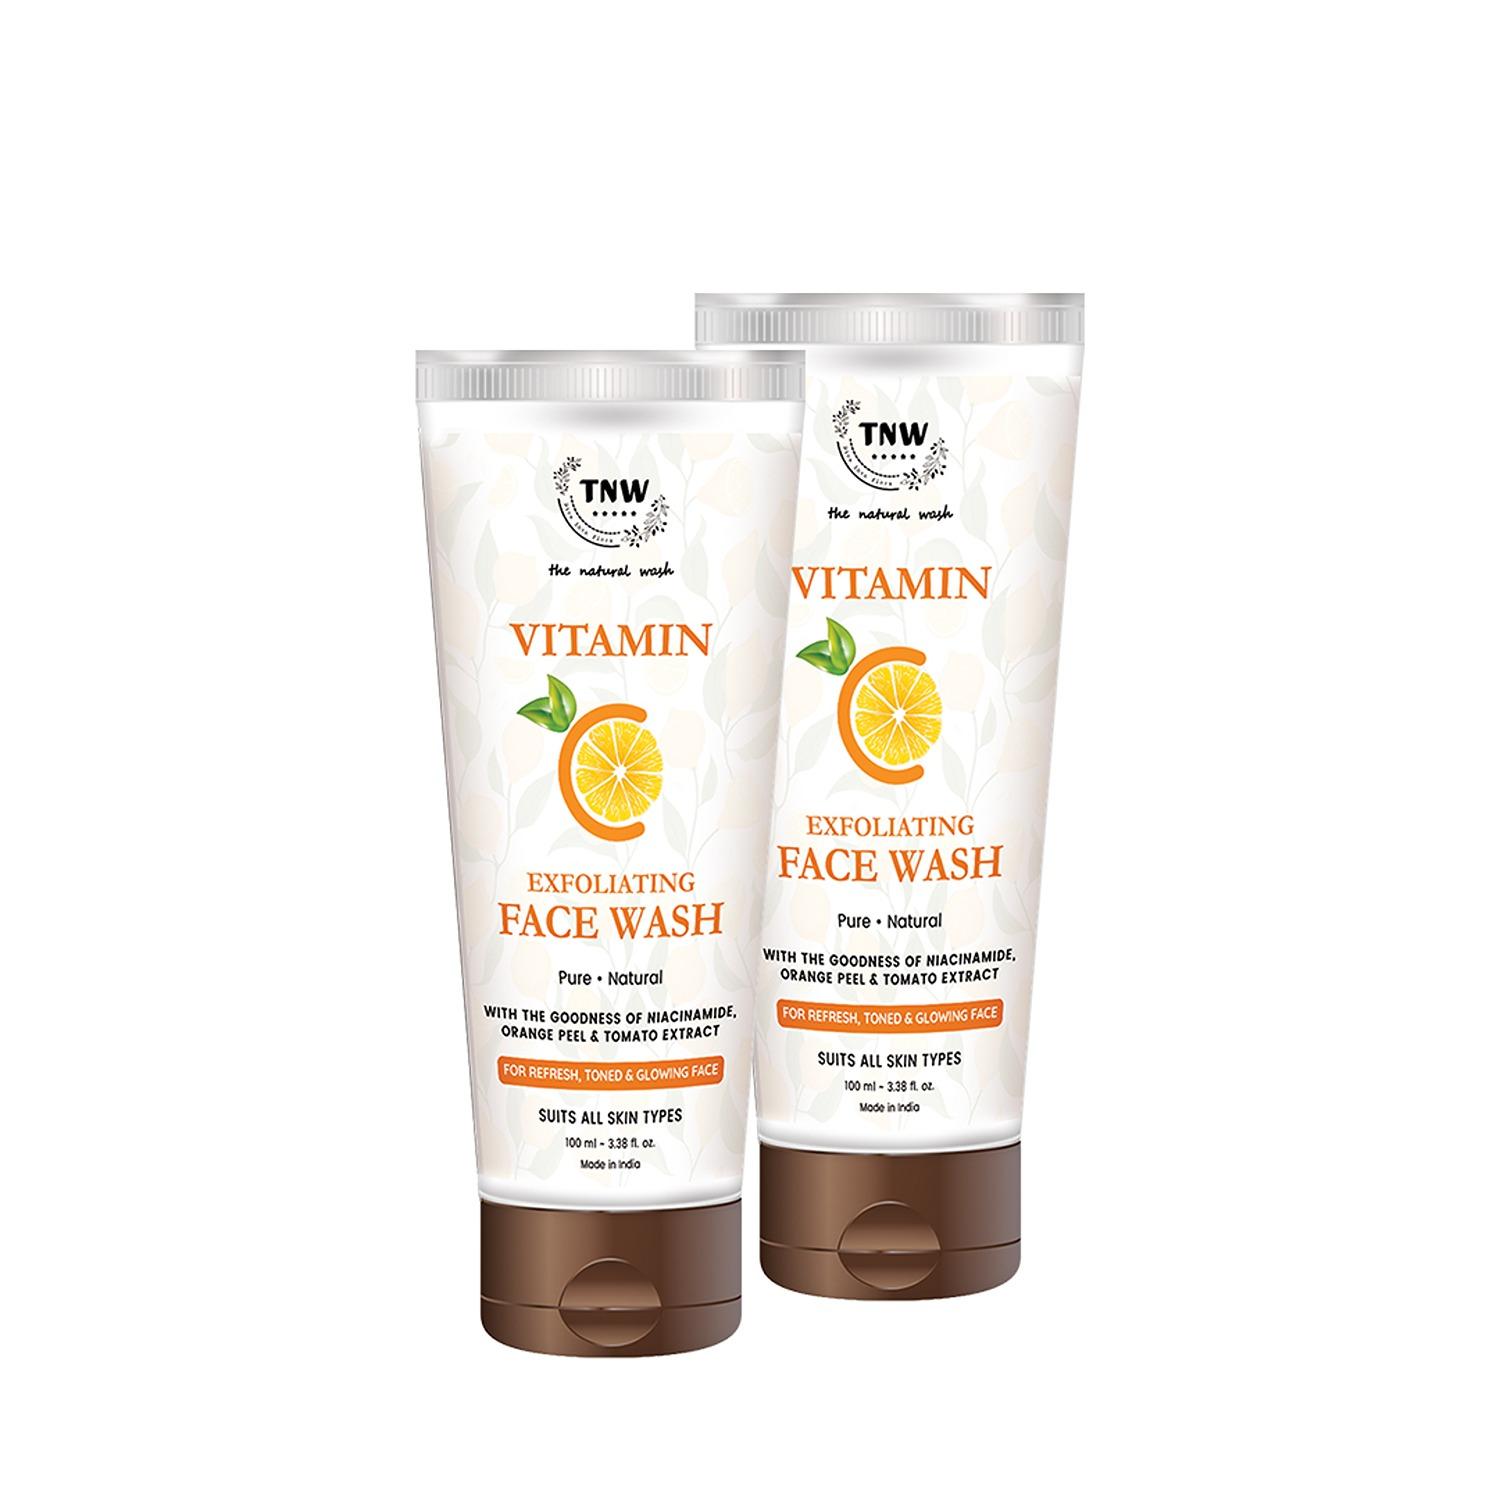 TNW The Natural Wash | TNW The Natural Wash Vitamin C Face Wash with Exfoliating Pack of 2 Combo